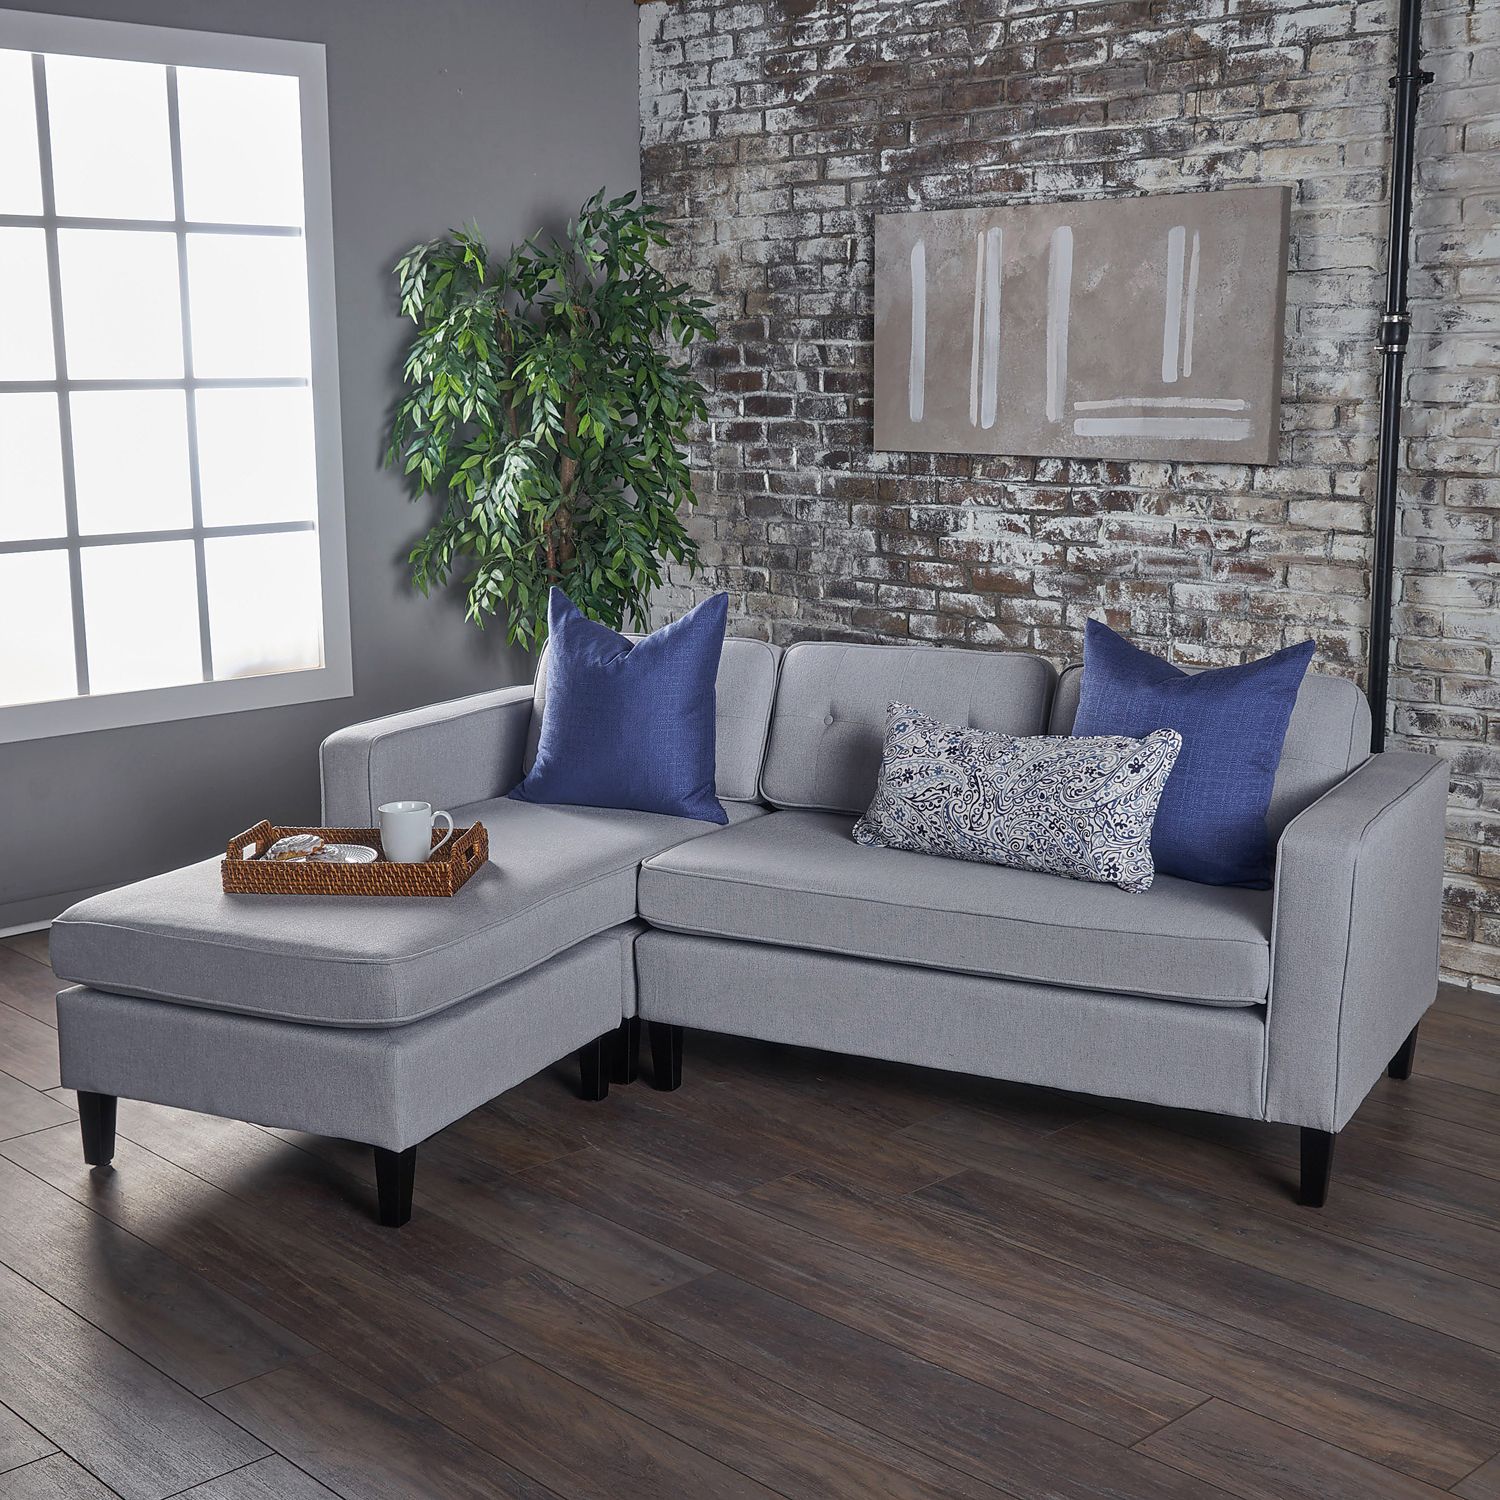 Light Gray Wilder Chaise Sectional Sofa – Pier1 With Most Current Sectional Sofas In Gray (View 4 of 25)